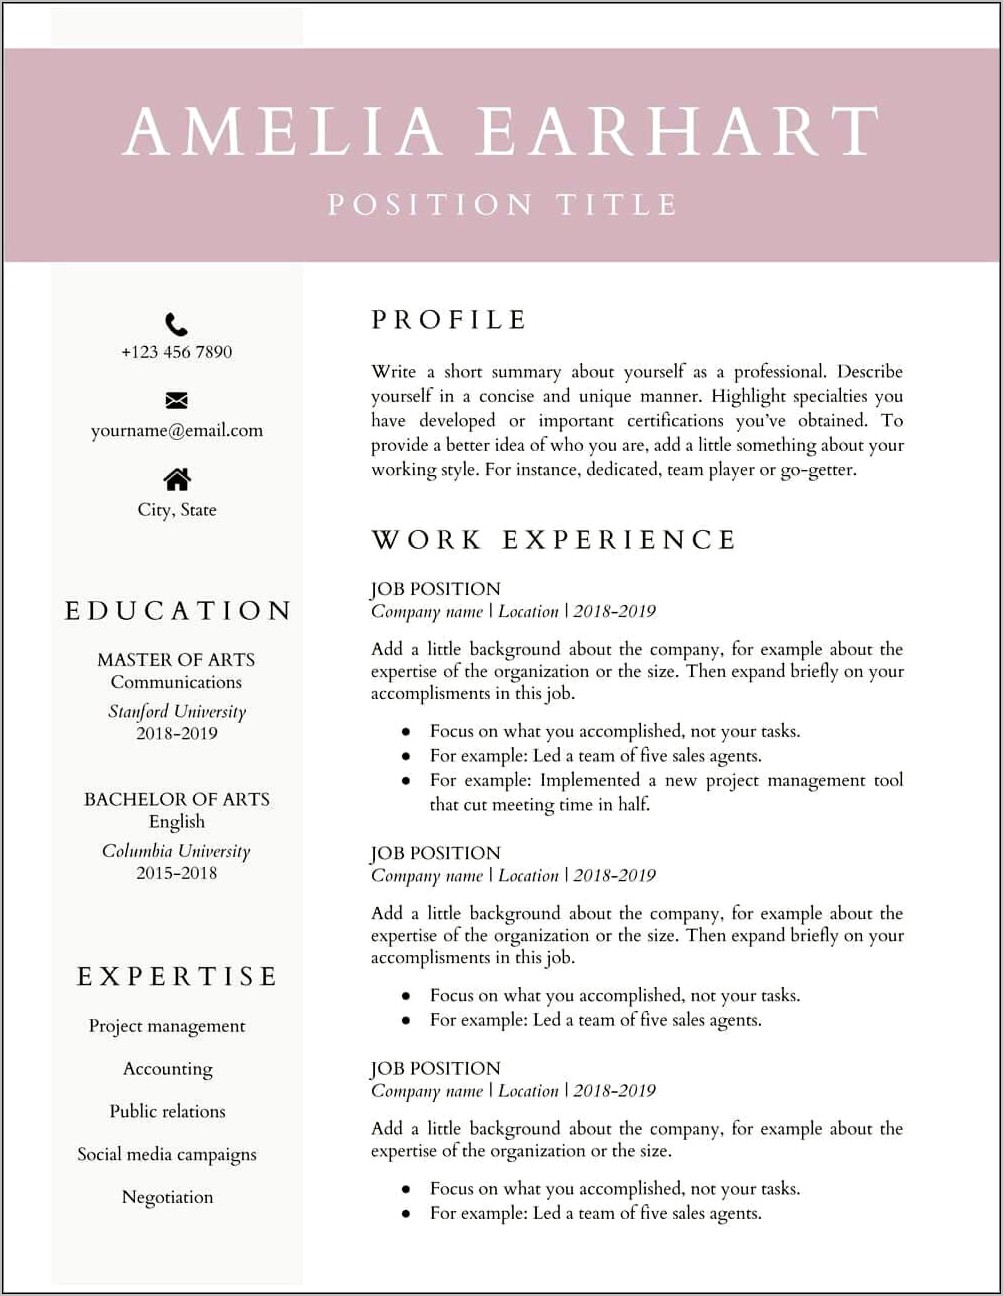 resume-format-for-freshers-free-download-latest-doc-resume-example